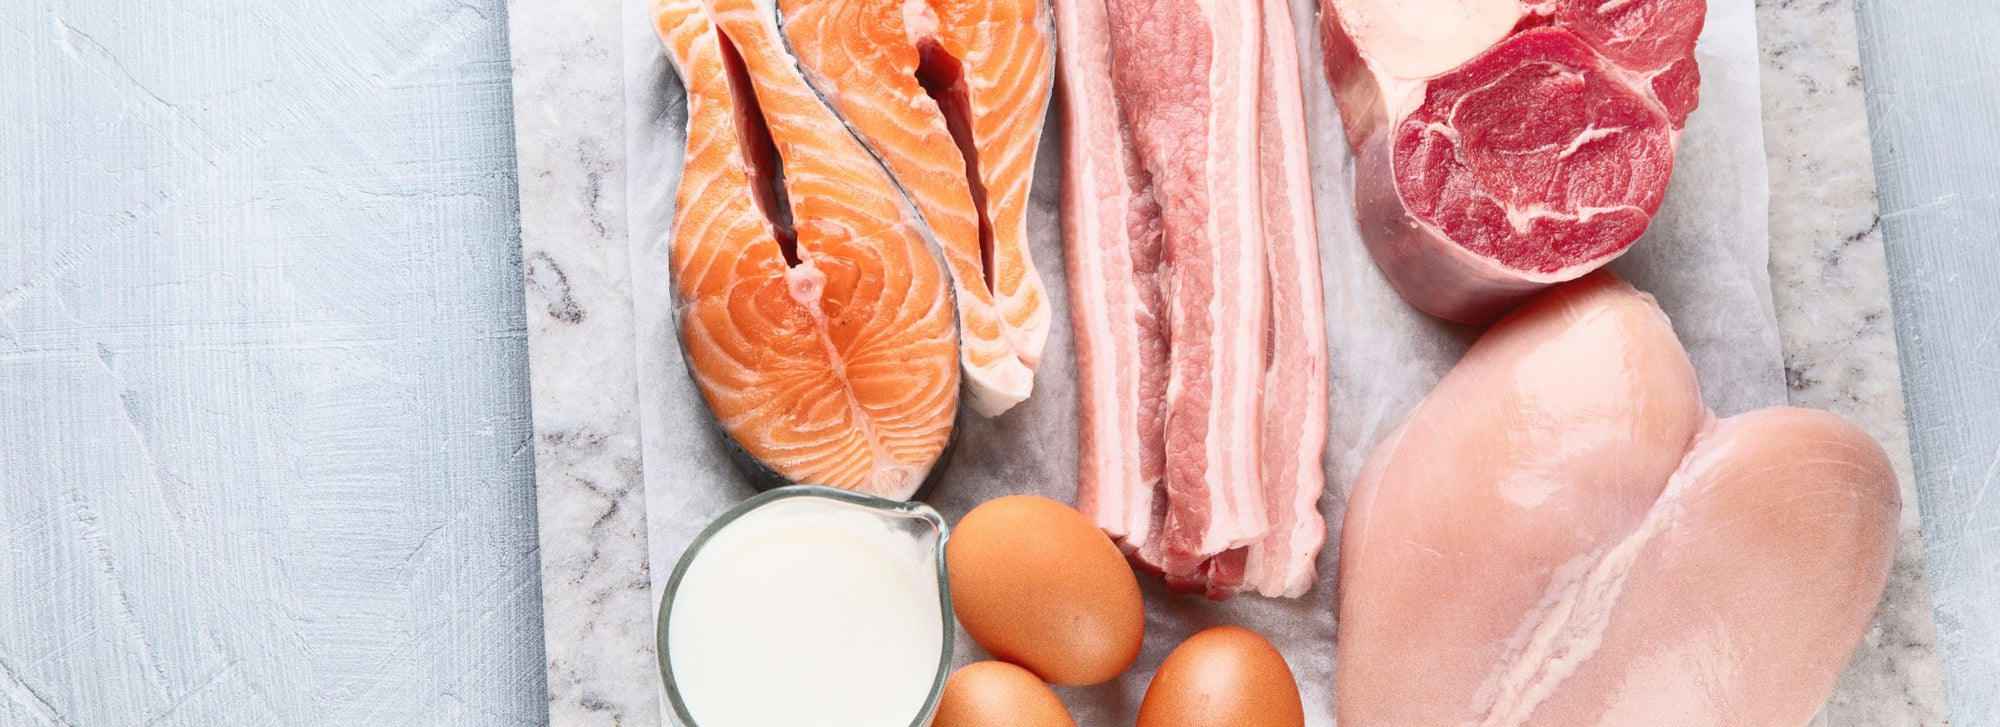 Tips For Getting More Protein in Your Diet